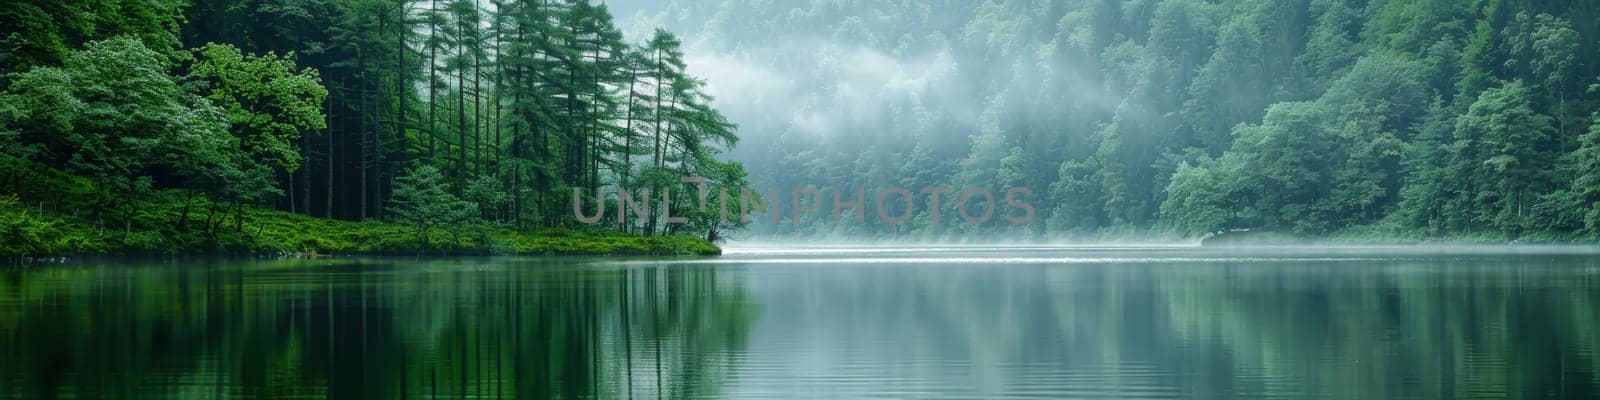 A lake surrounded by trees and fog in the distance